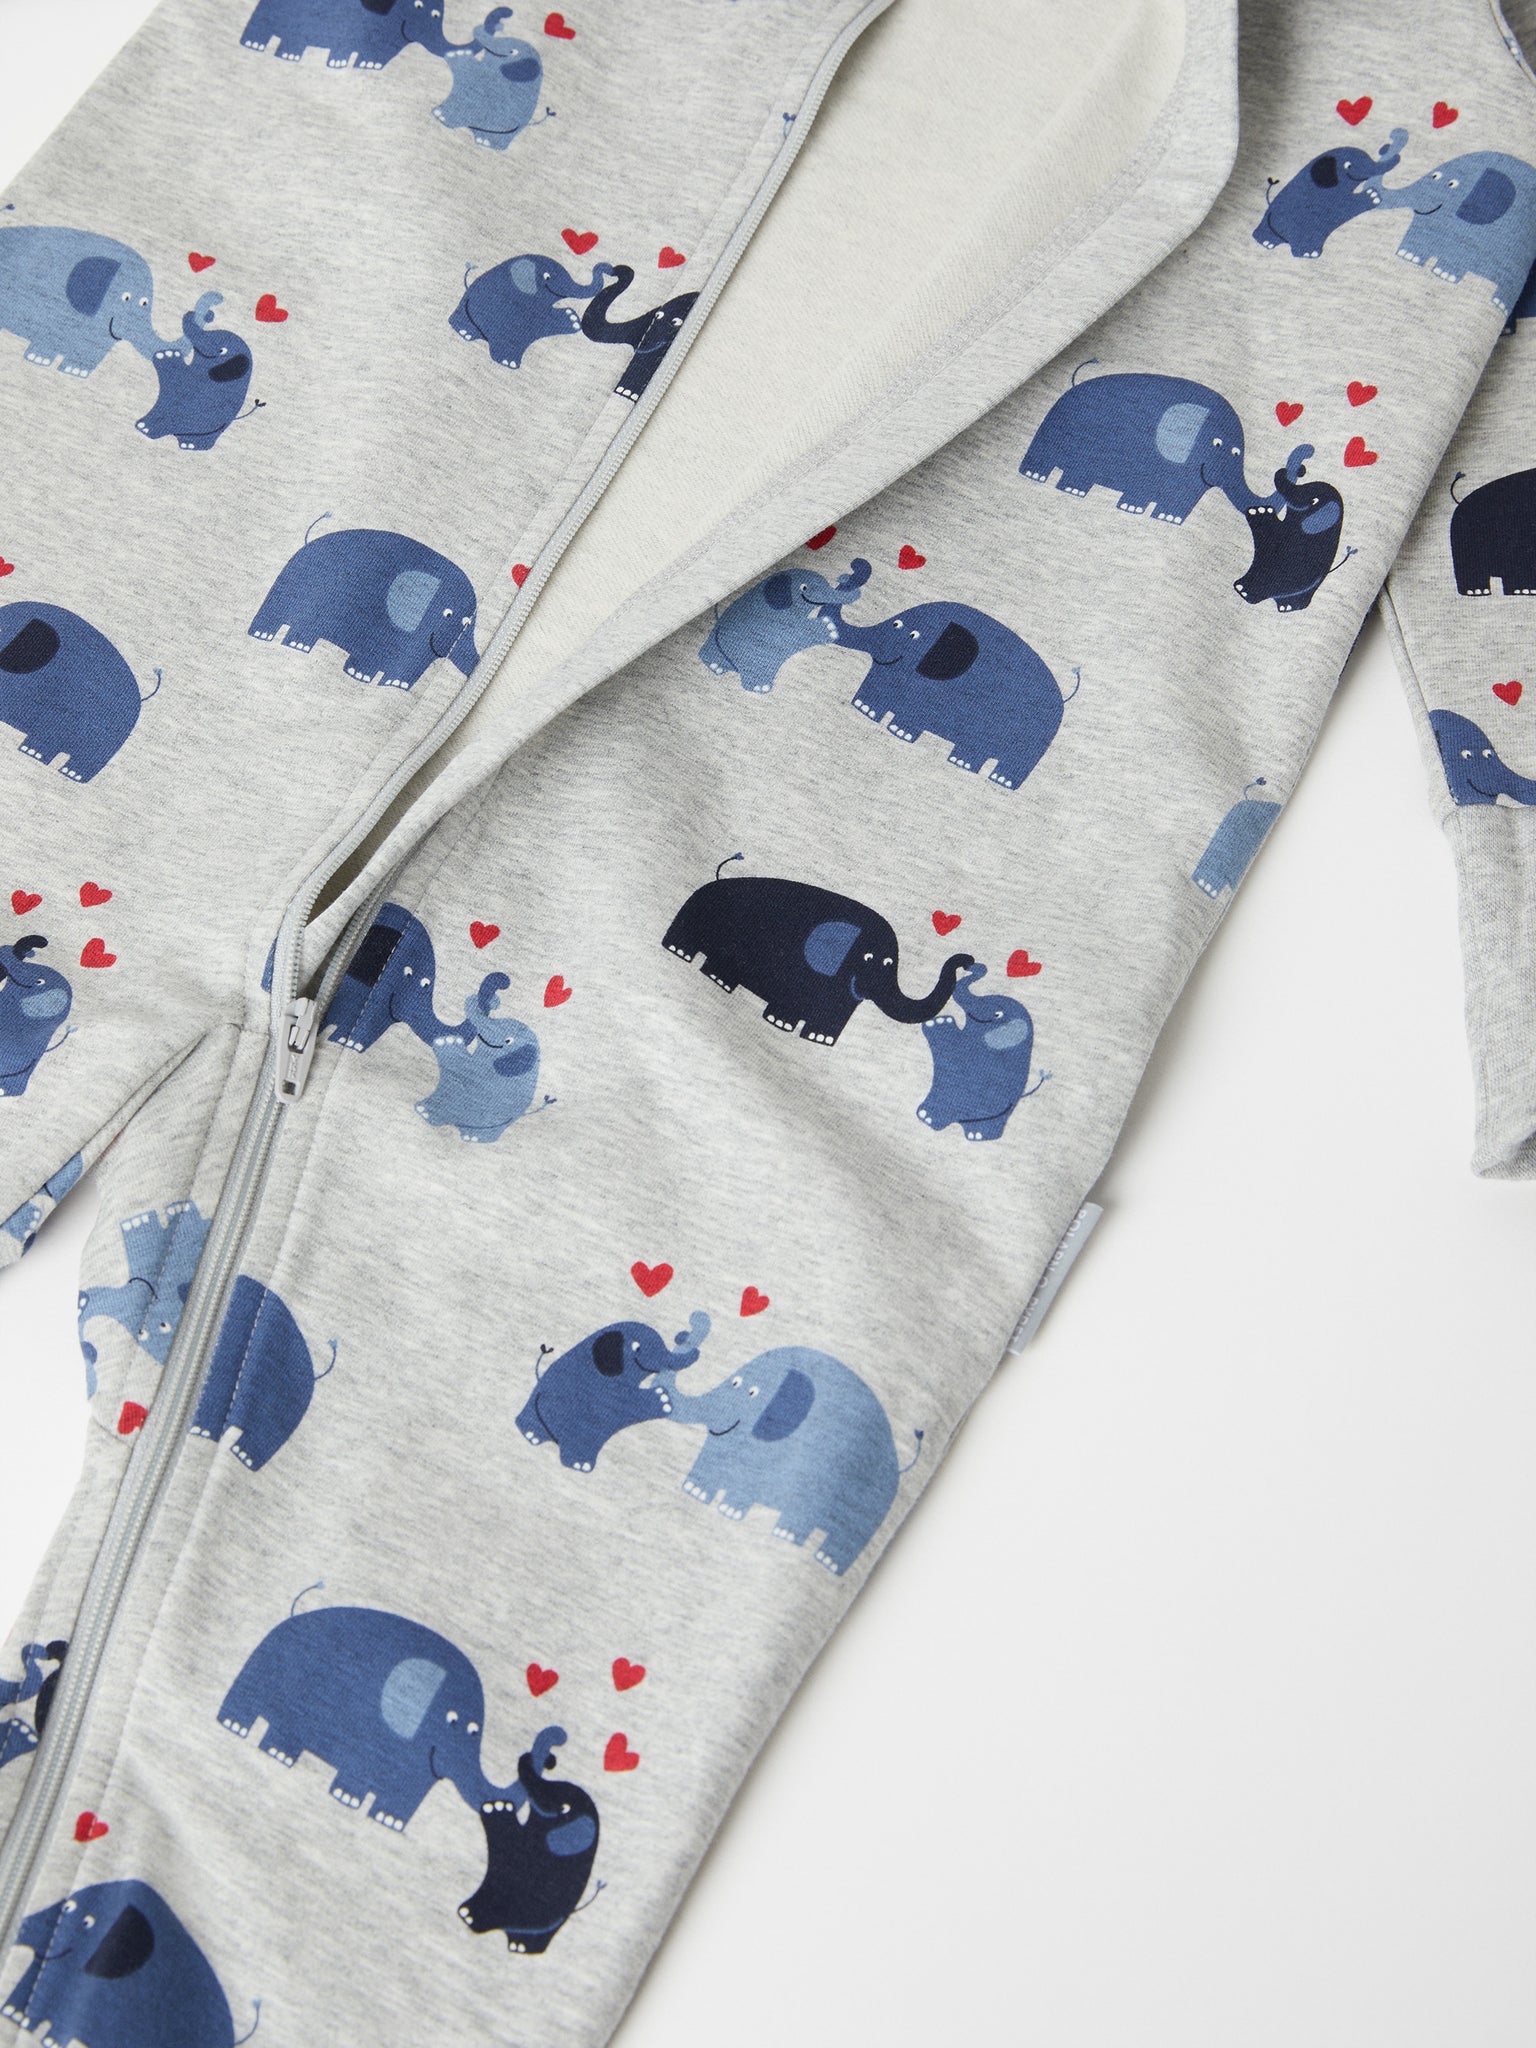 Grey Organic Cotton Baby All-in-one from the Polarn O. Pyret baby collection. Nordic baby clothes made from sustainable sources.